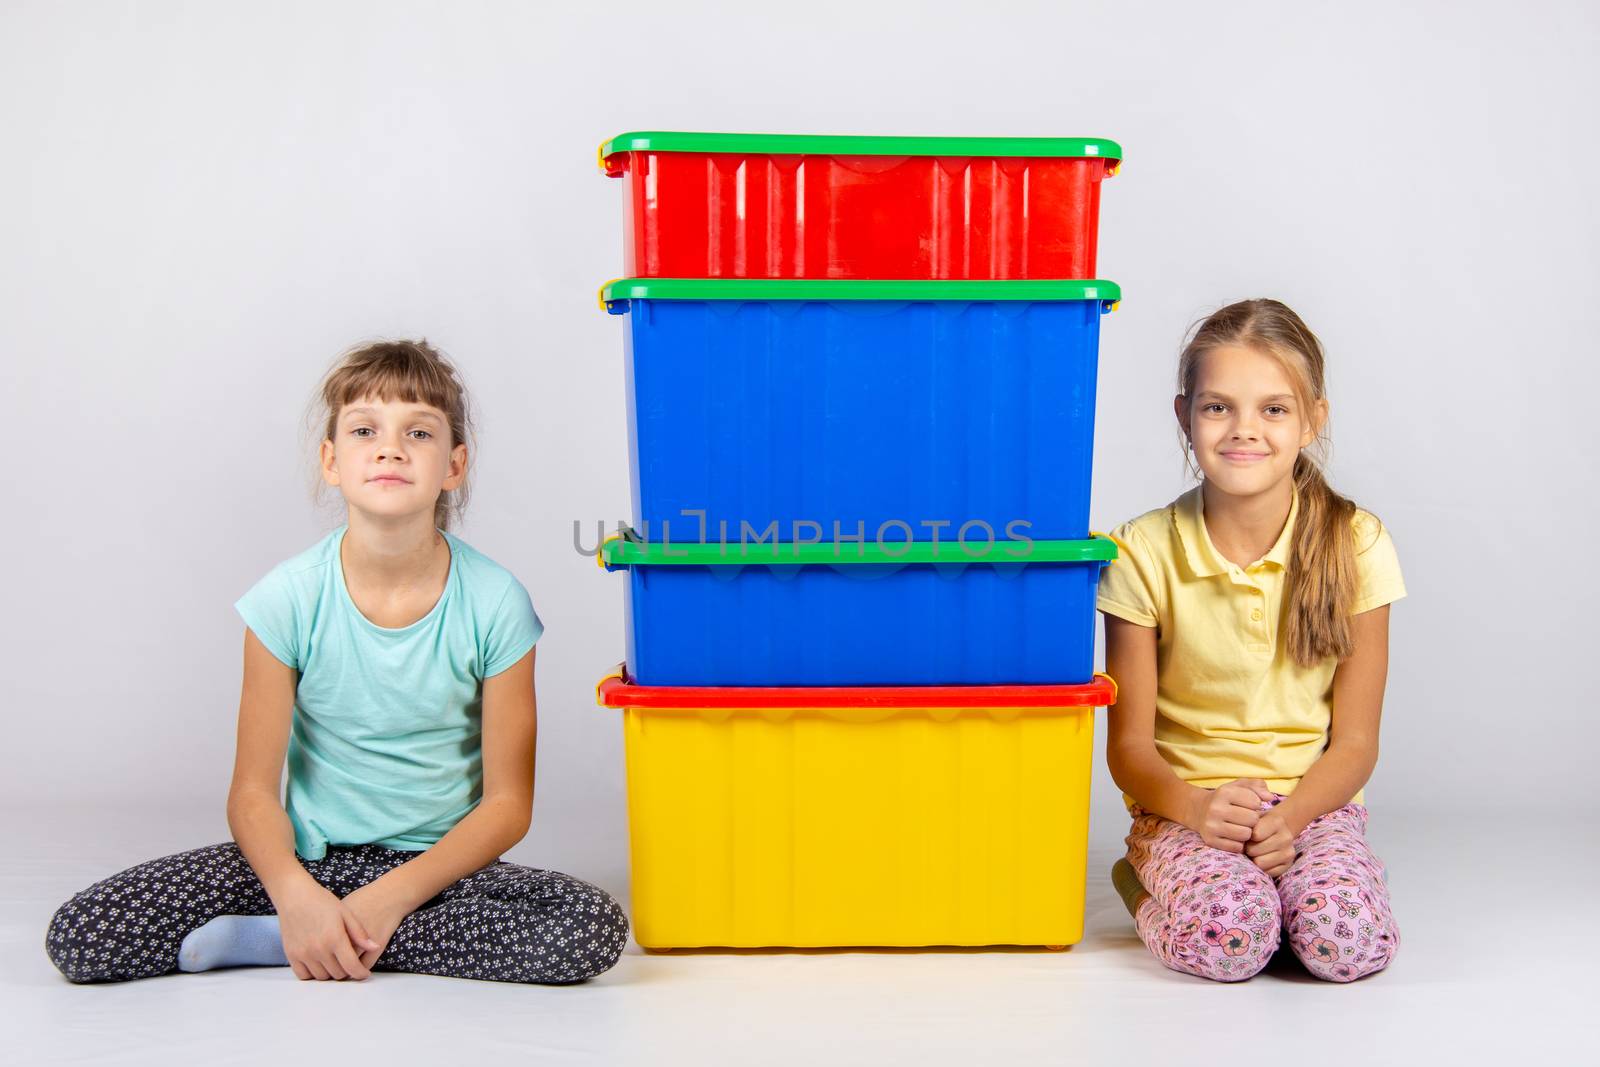 Two girls are sitting next to four large plastic boxes